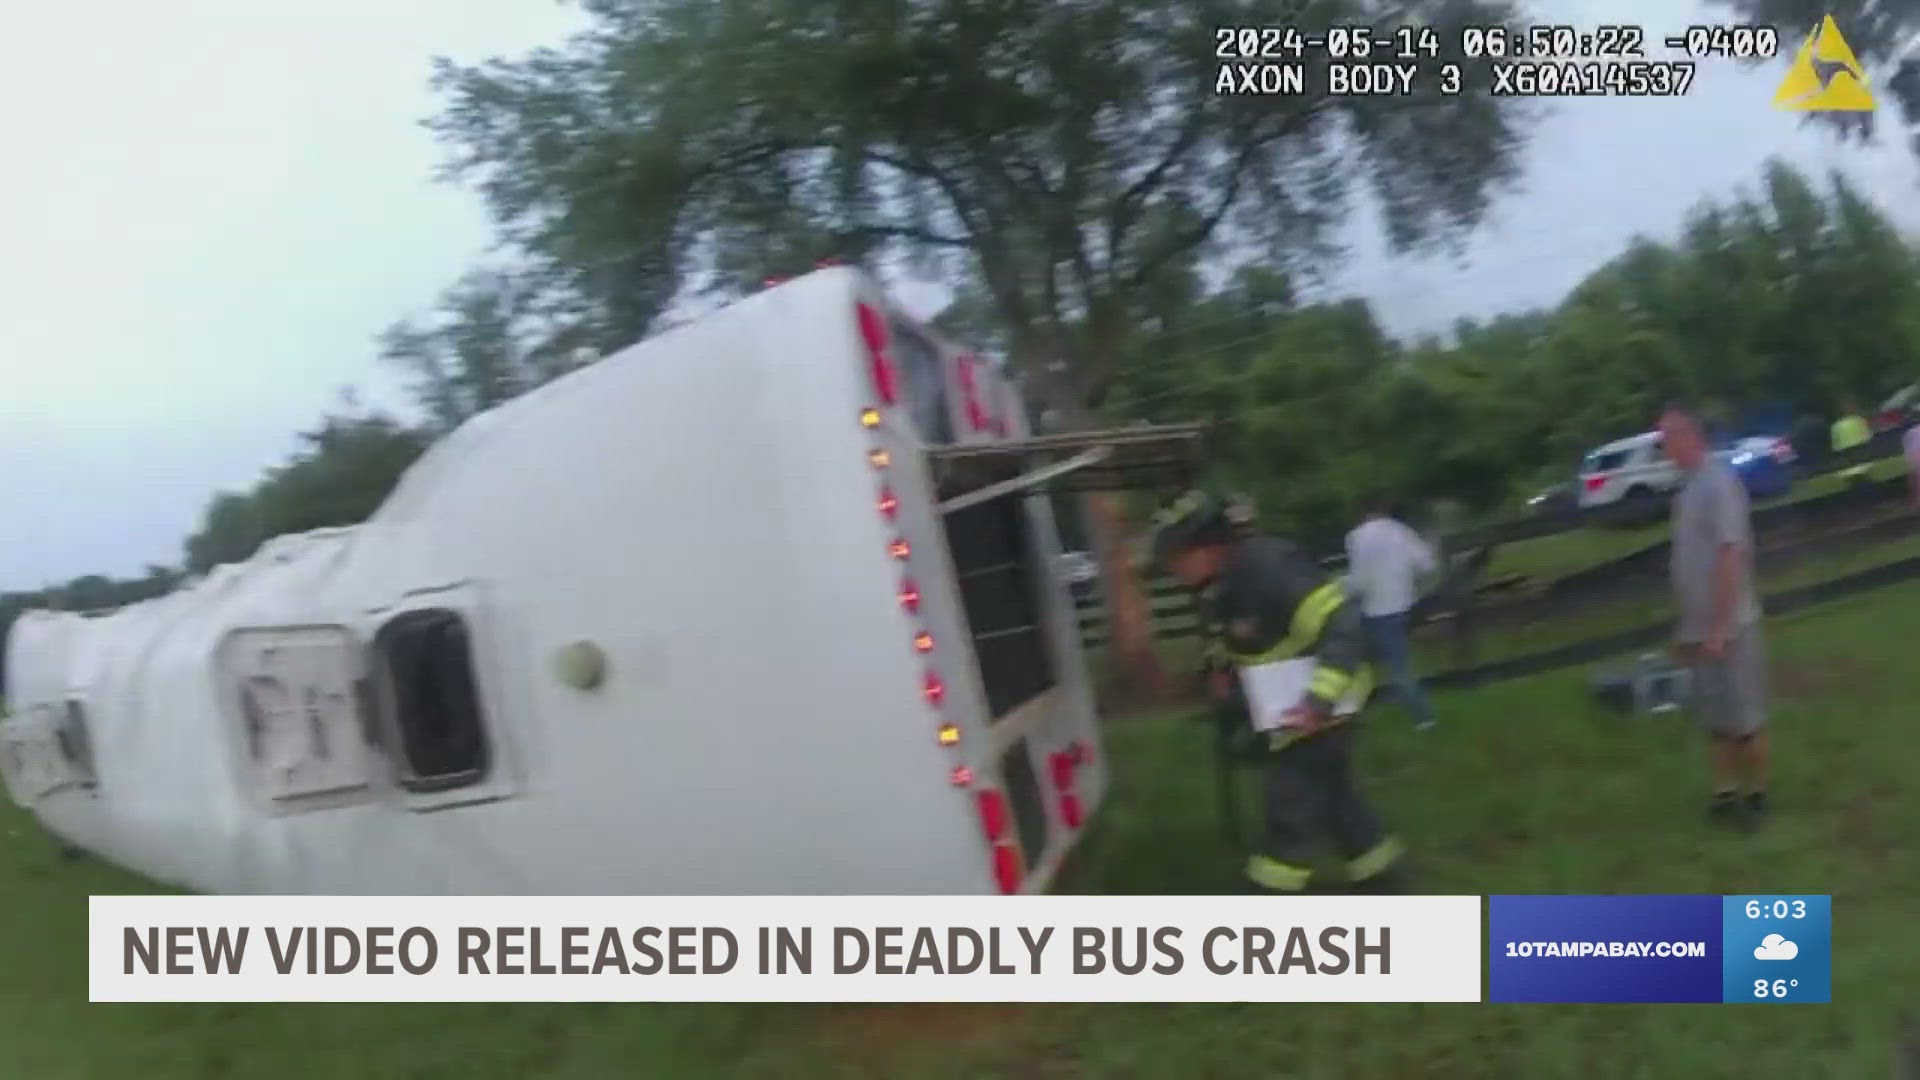 The Marion County Sheriff's Office released body camera video and dashboard camera video showing the response to the deadly bus crash.